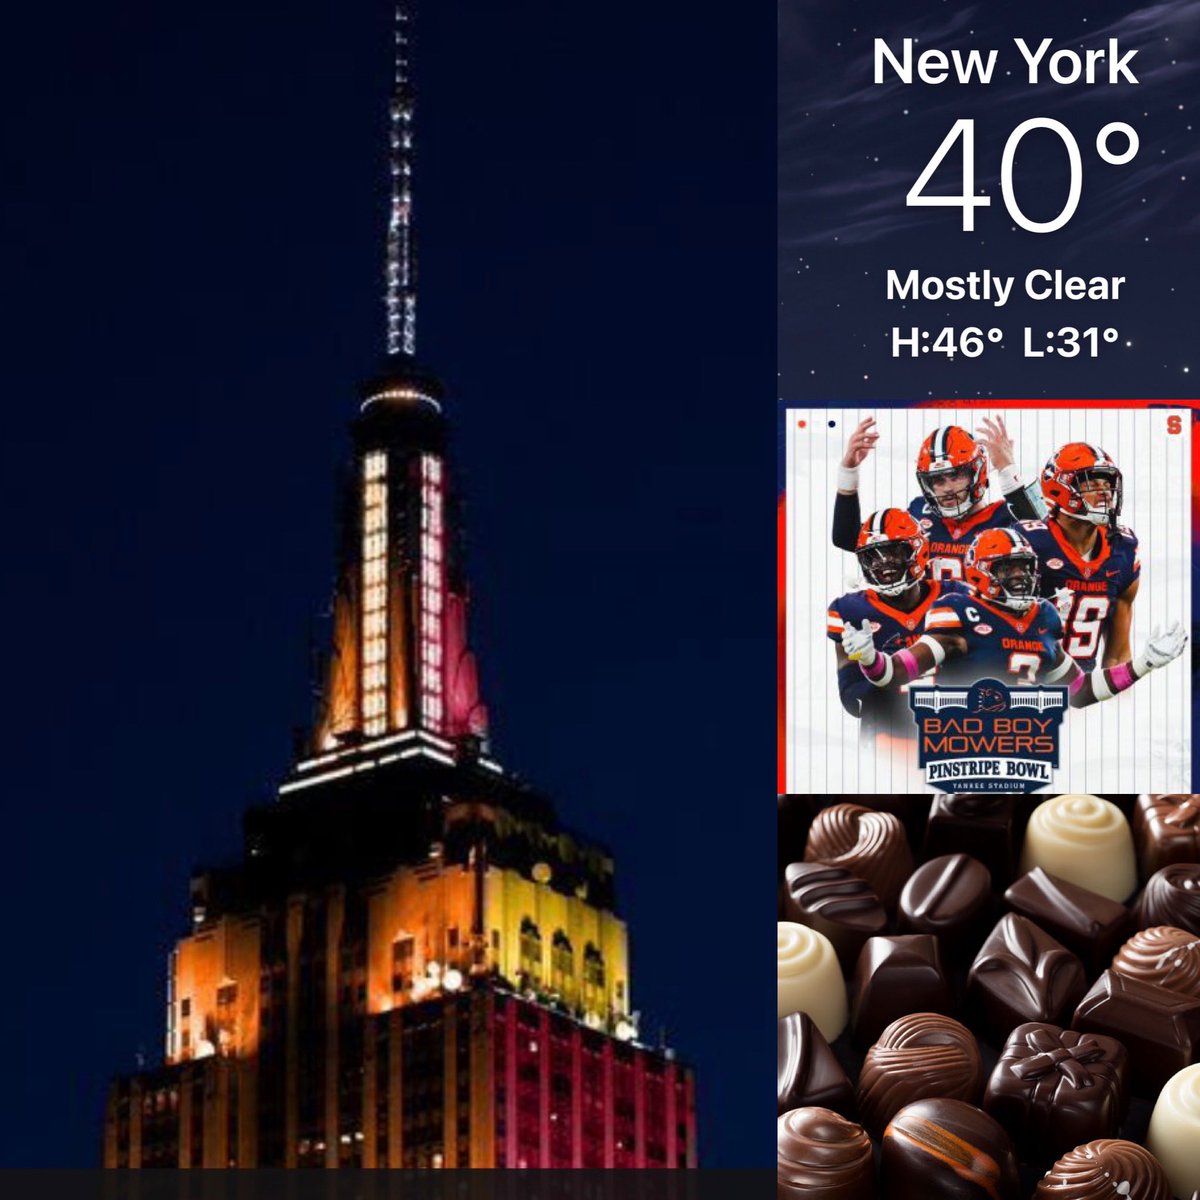 Sunset was at 4:36PM as #NYers enjoyed a warmup in temps above freezing. The @EmpireStateBldg is lit in honor of the #PinstripeBowl tomorrow @yankeestadium btw the #SyracuseOrange vs #MinnesotaGoldenGophers as #CandyLovers celebrate #NationalChocolateCandyDay @NationalDayCal @ny1